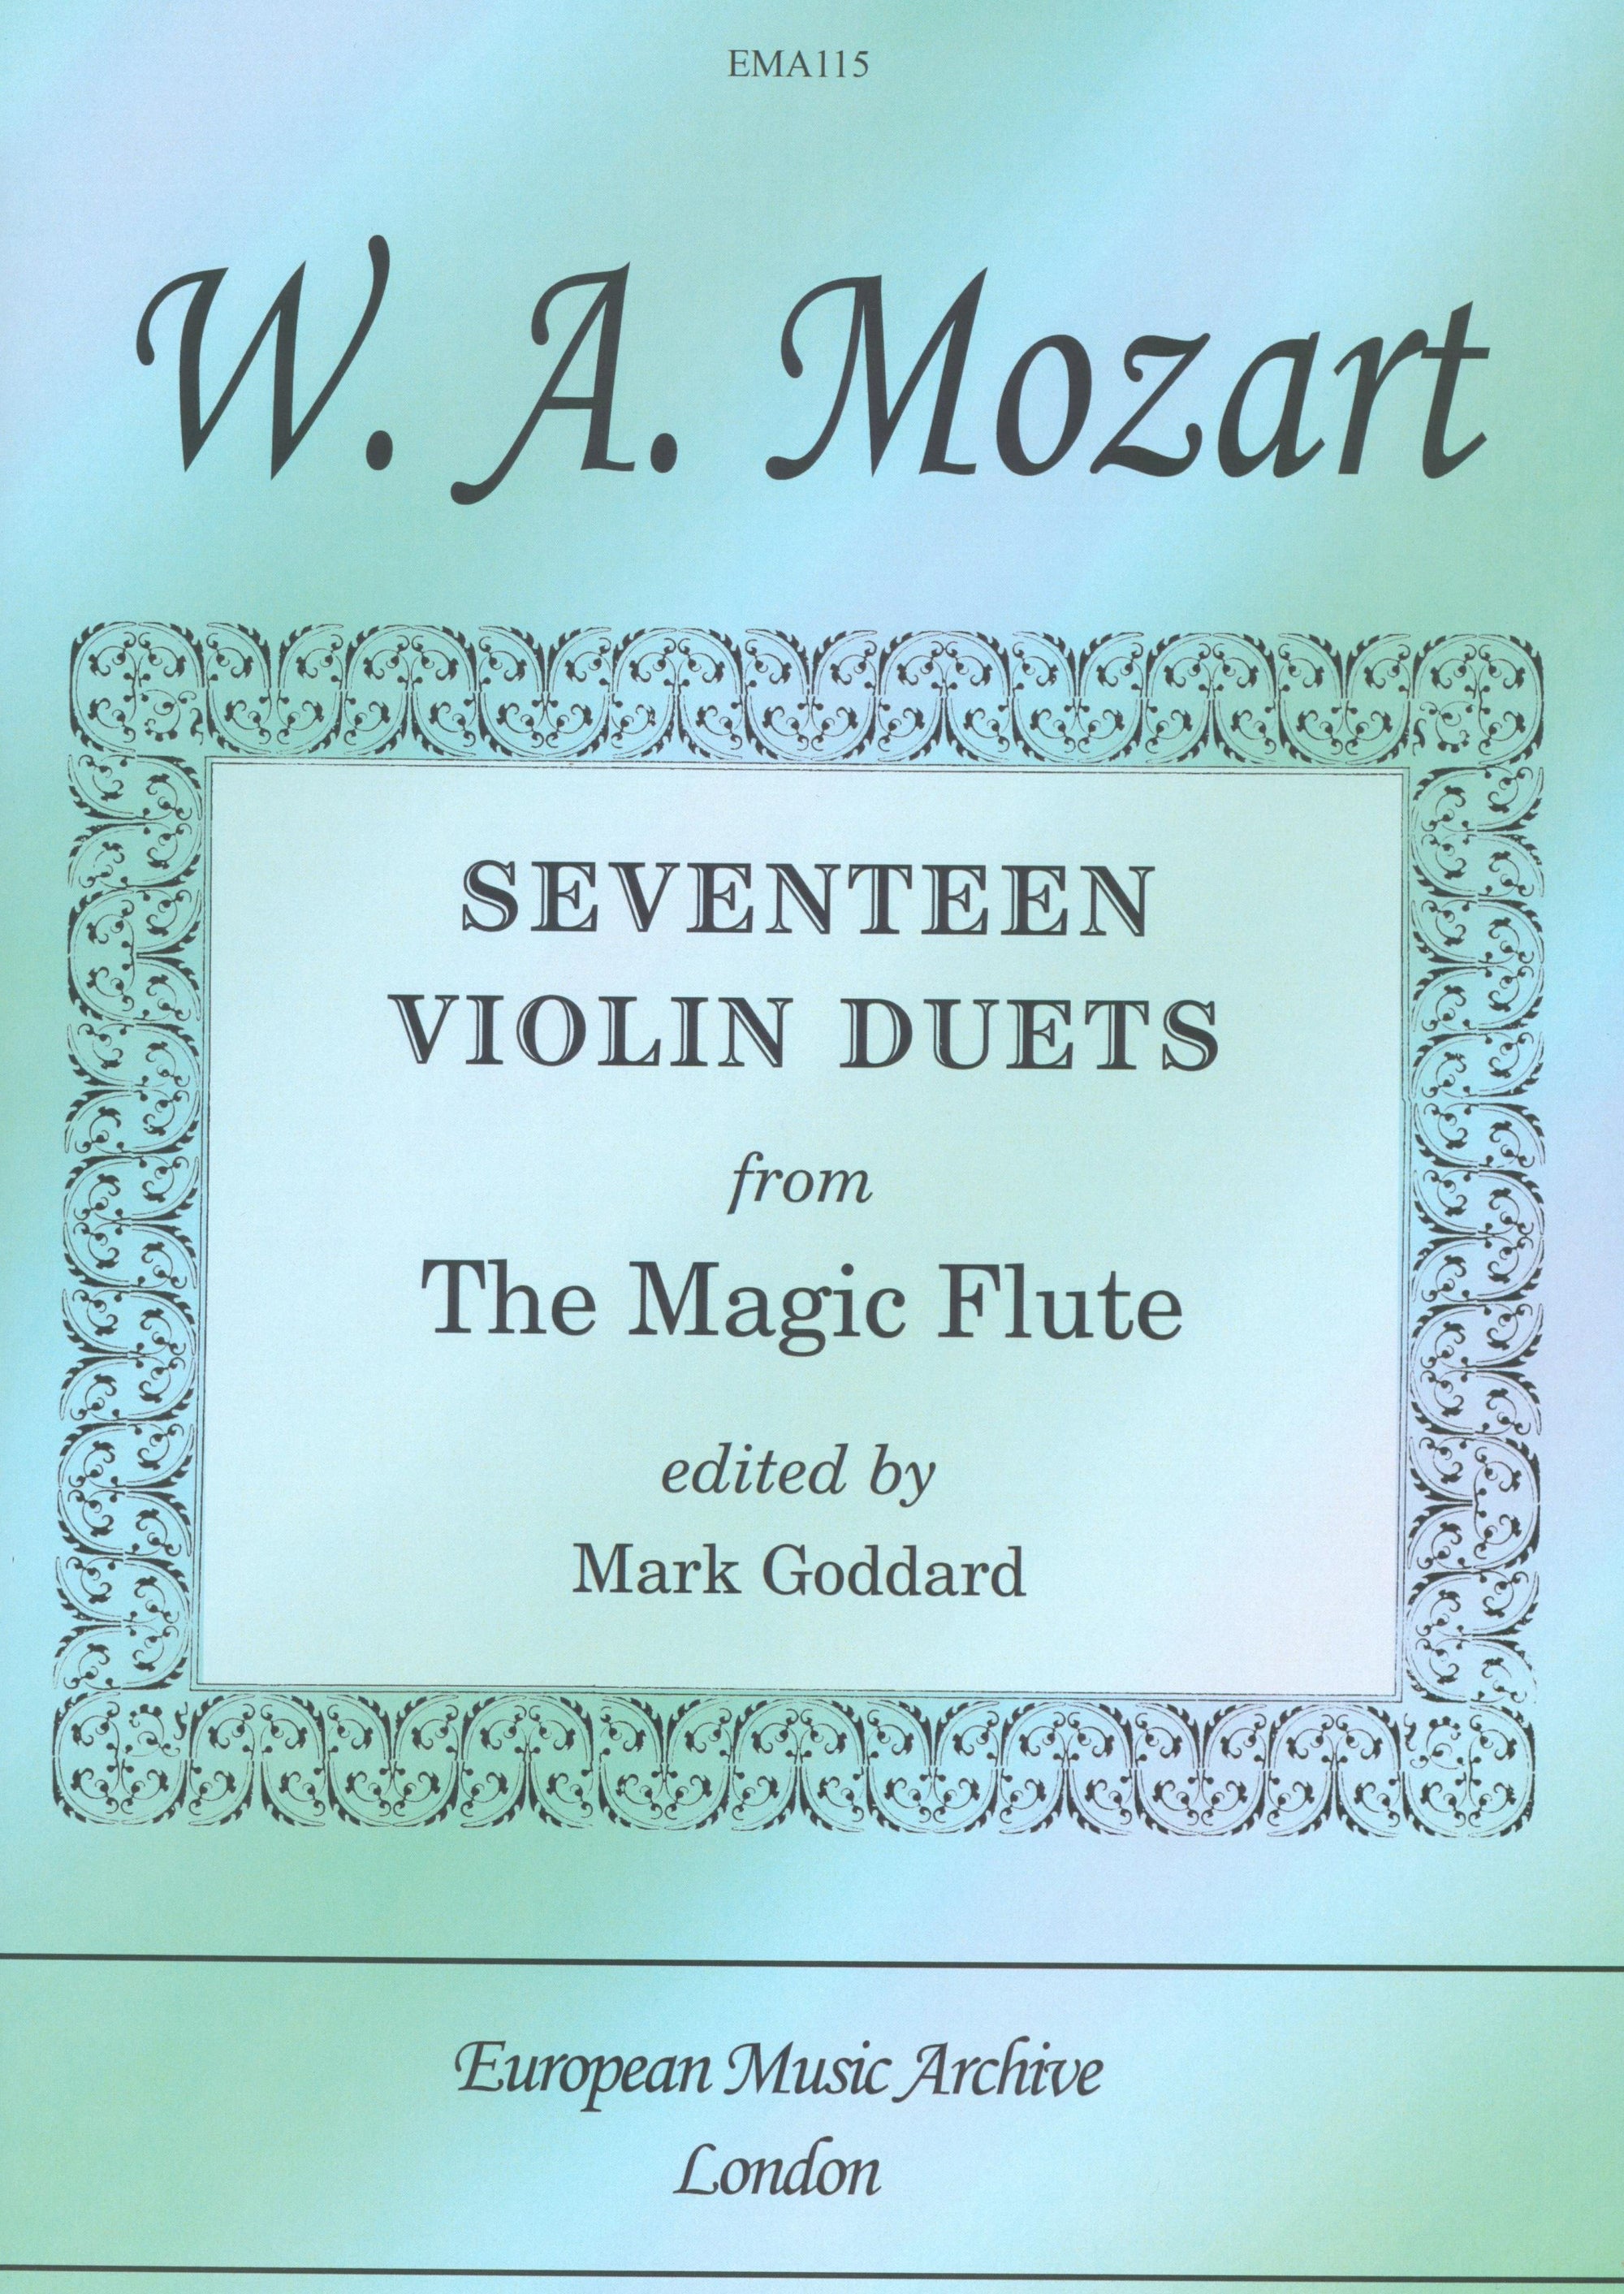 Mozart: 17 Violin Duets from "The Magic Flute"